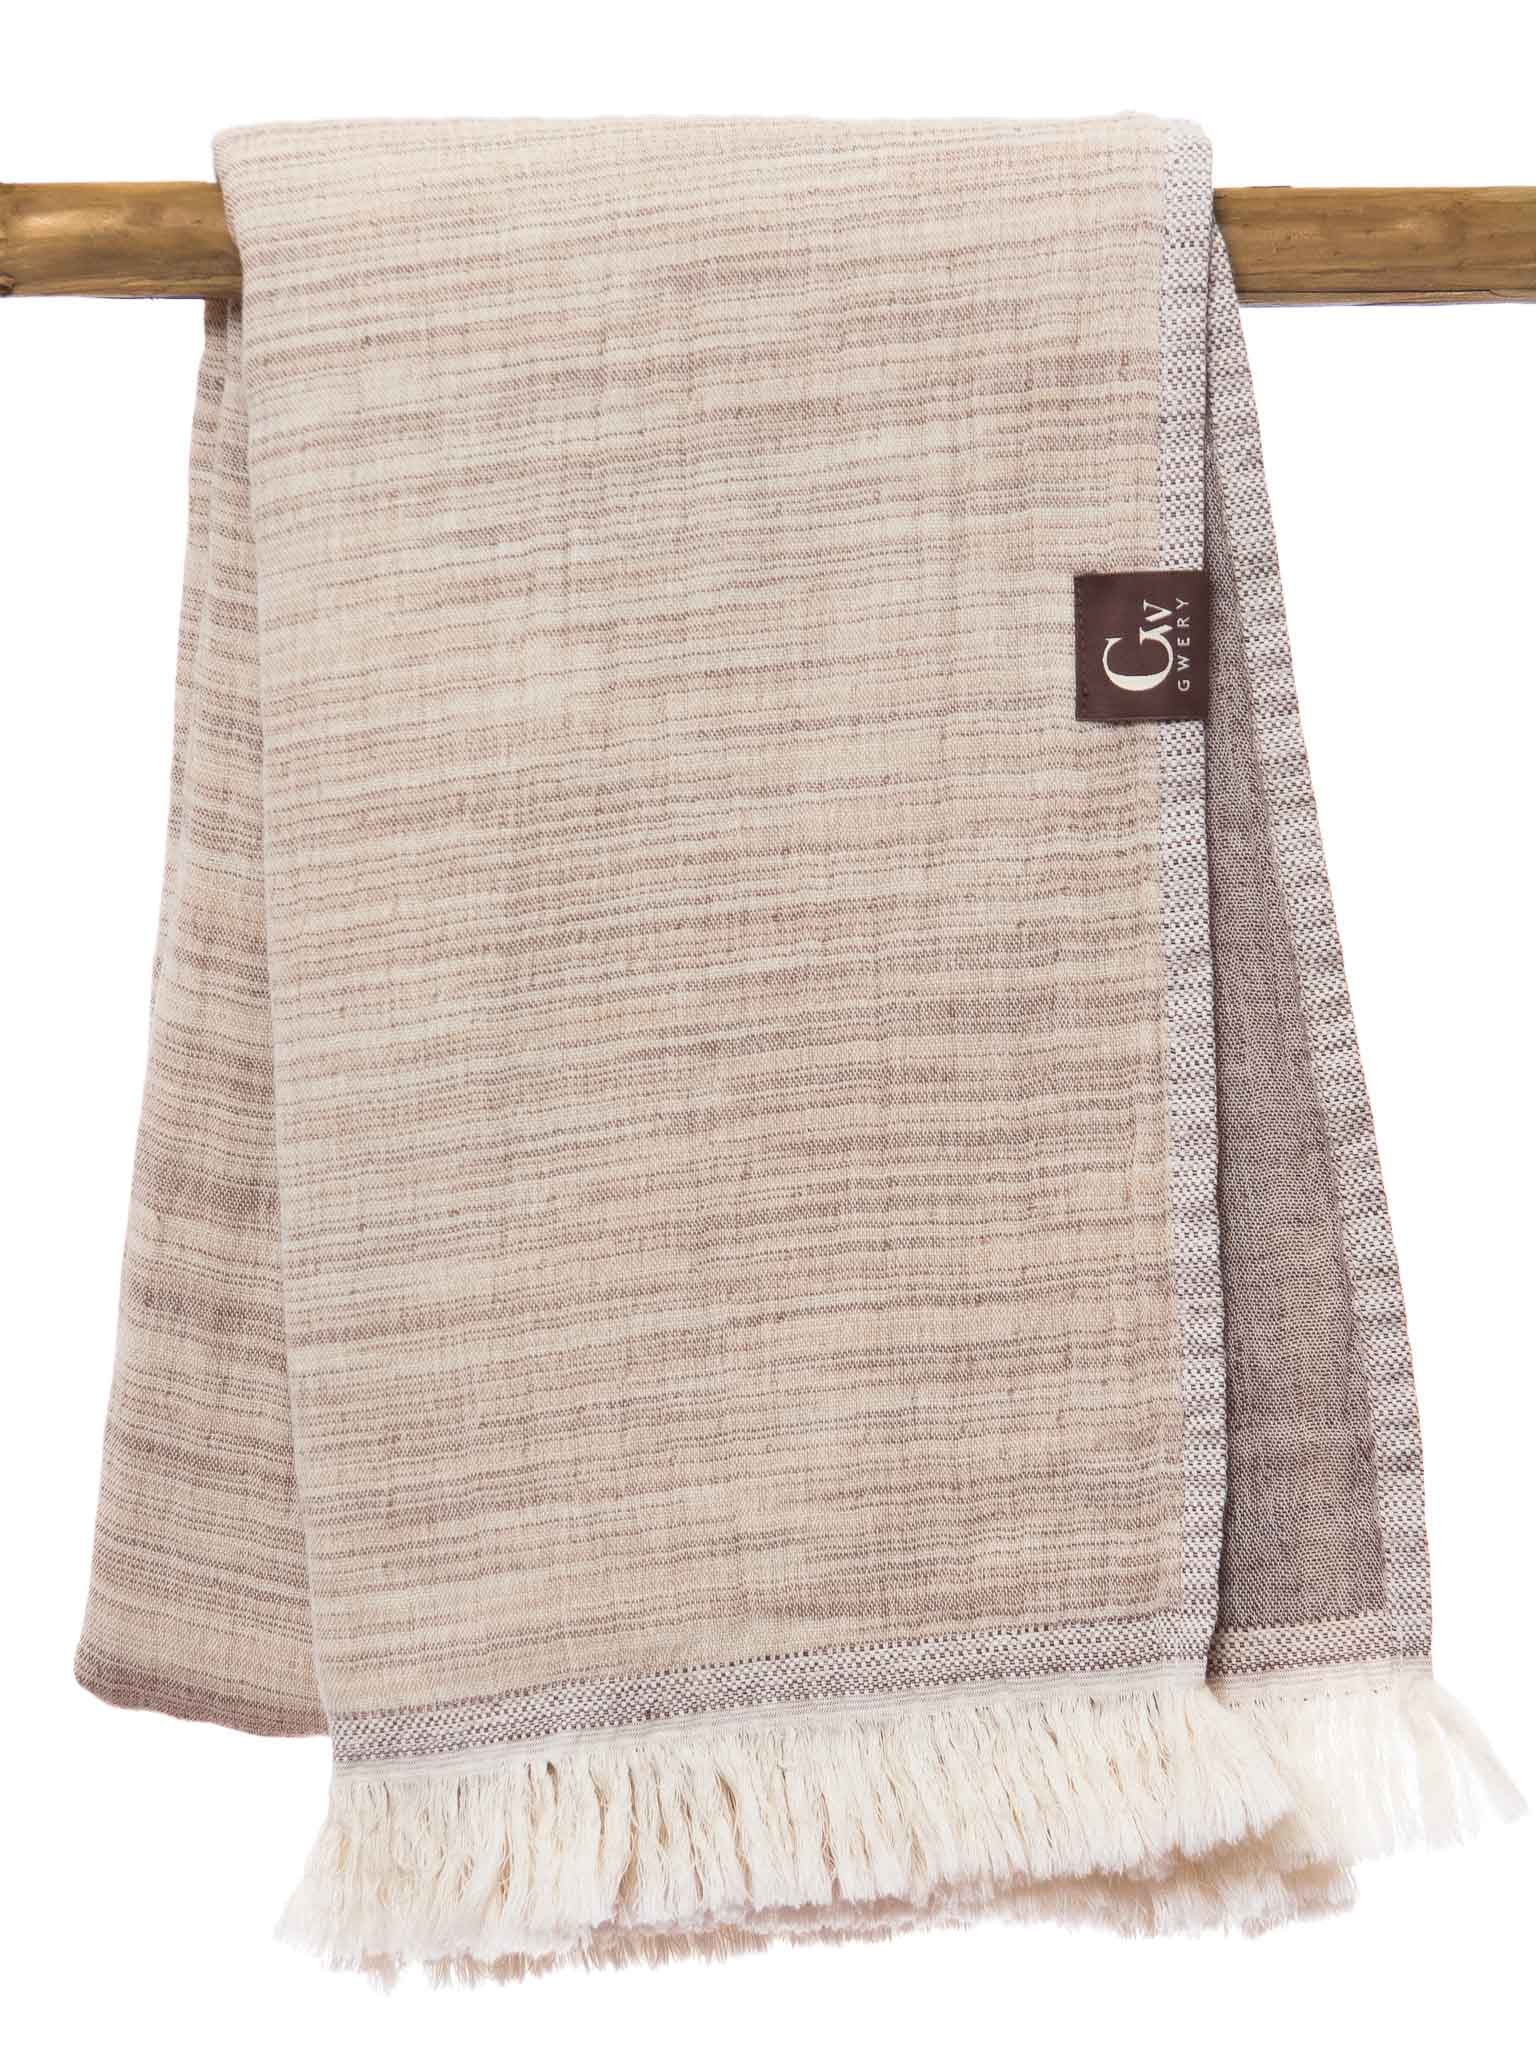 Brown patterned, double sided, beach towel folded